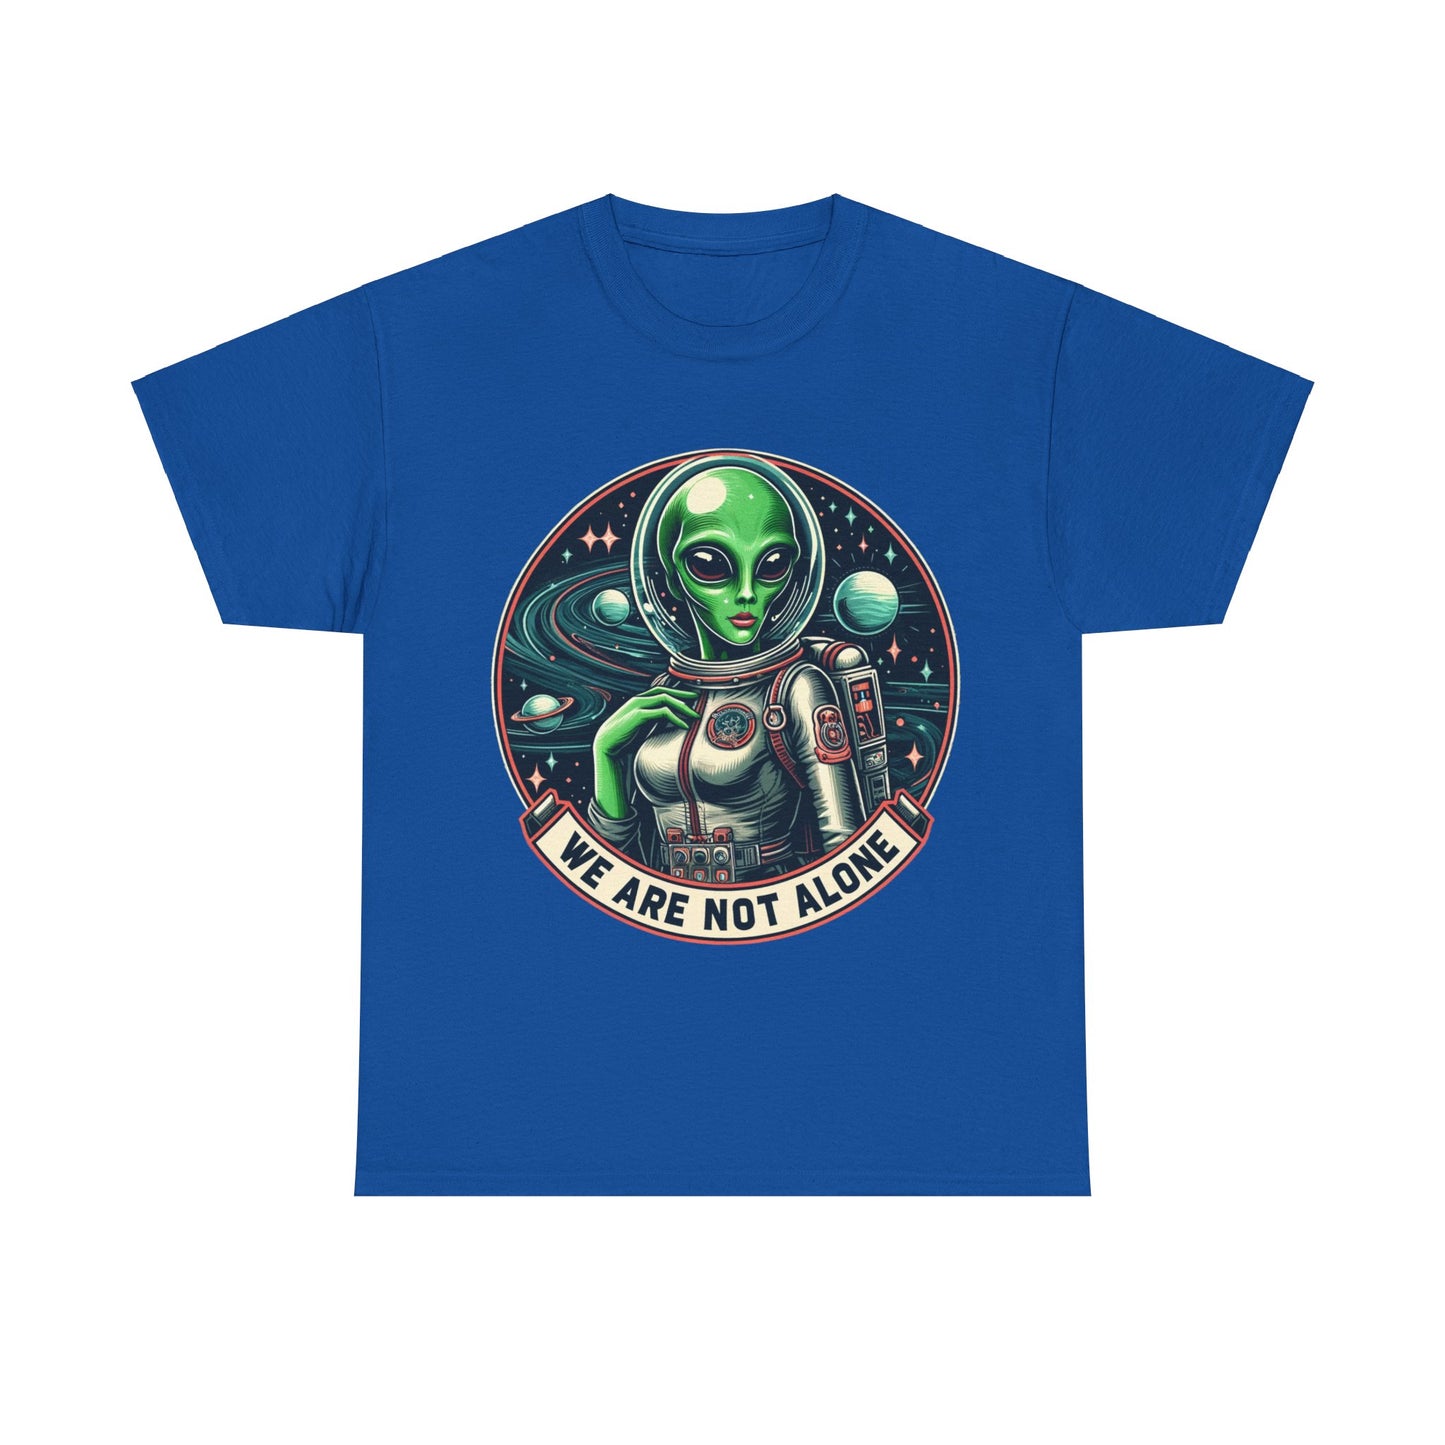 "Discover 'We Are Not Alone' Alien Tee: Embrace Cosmic Mysteries in Vintage Sci-Fi Style" 🌌✨